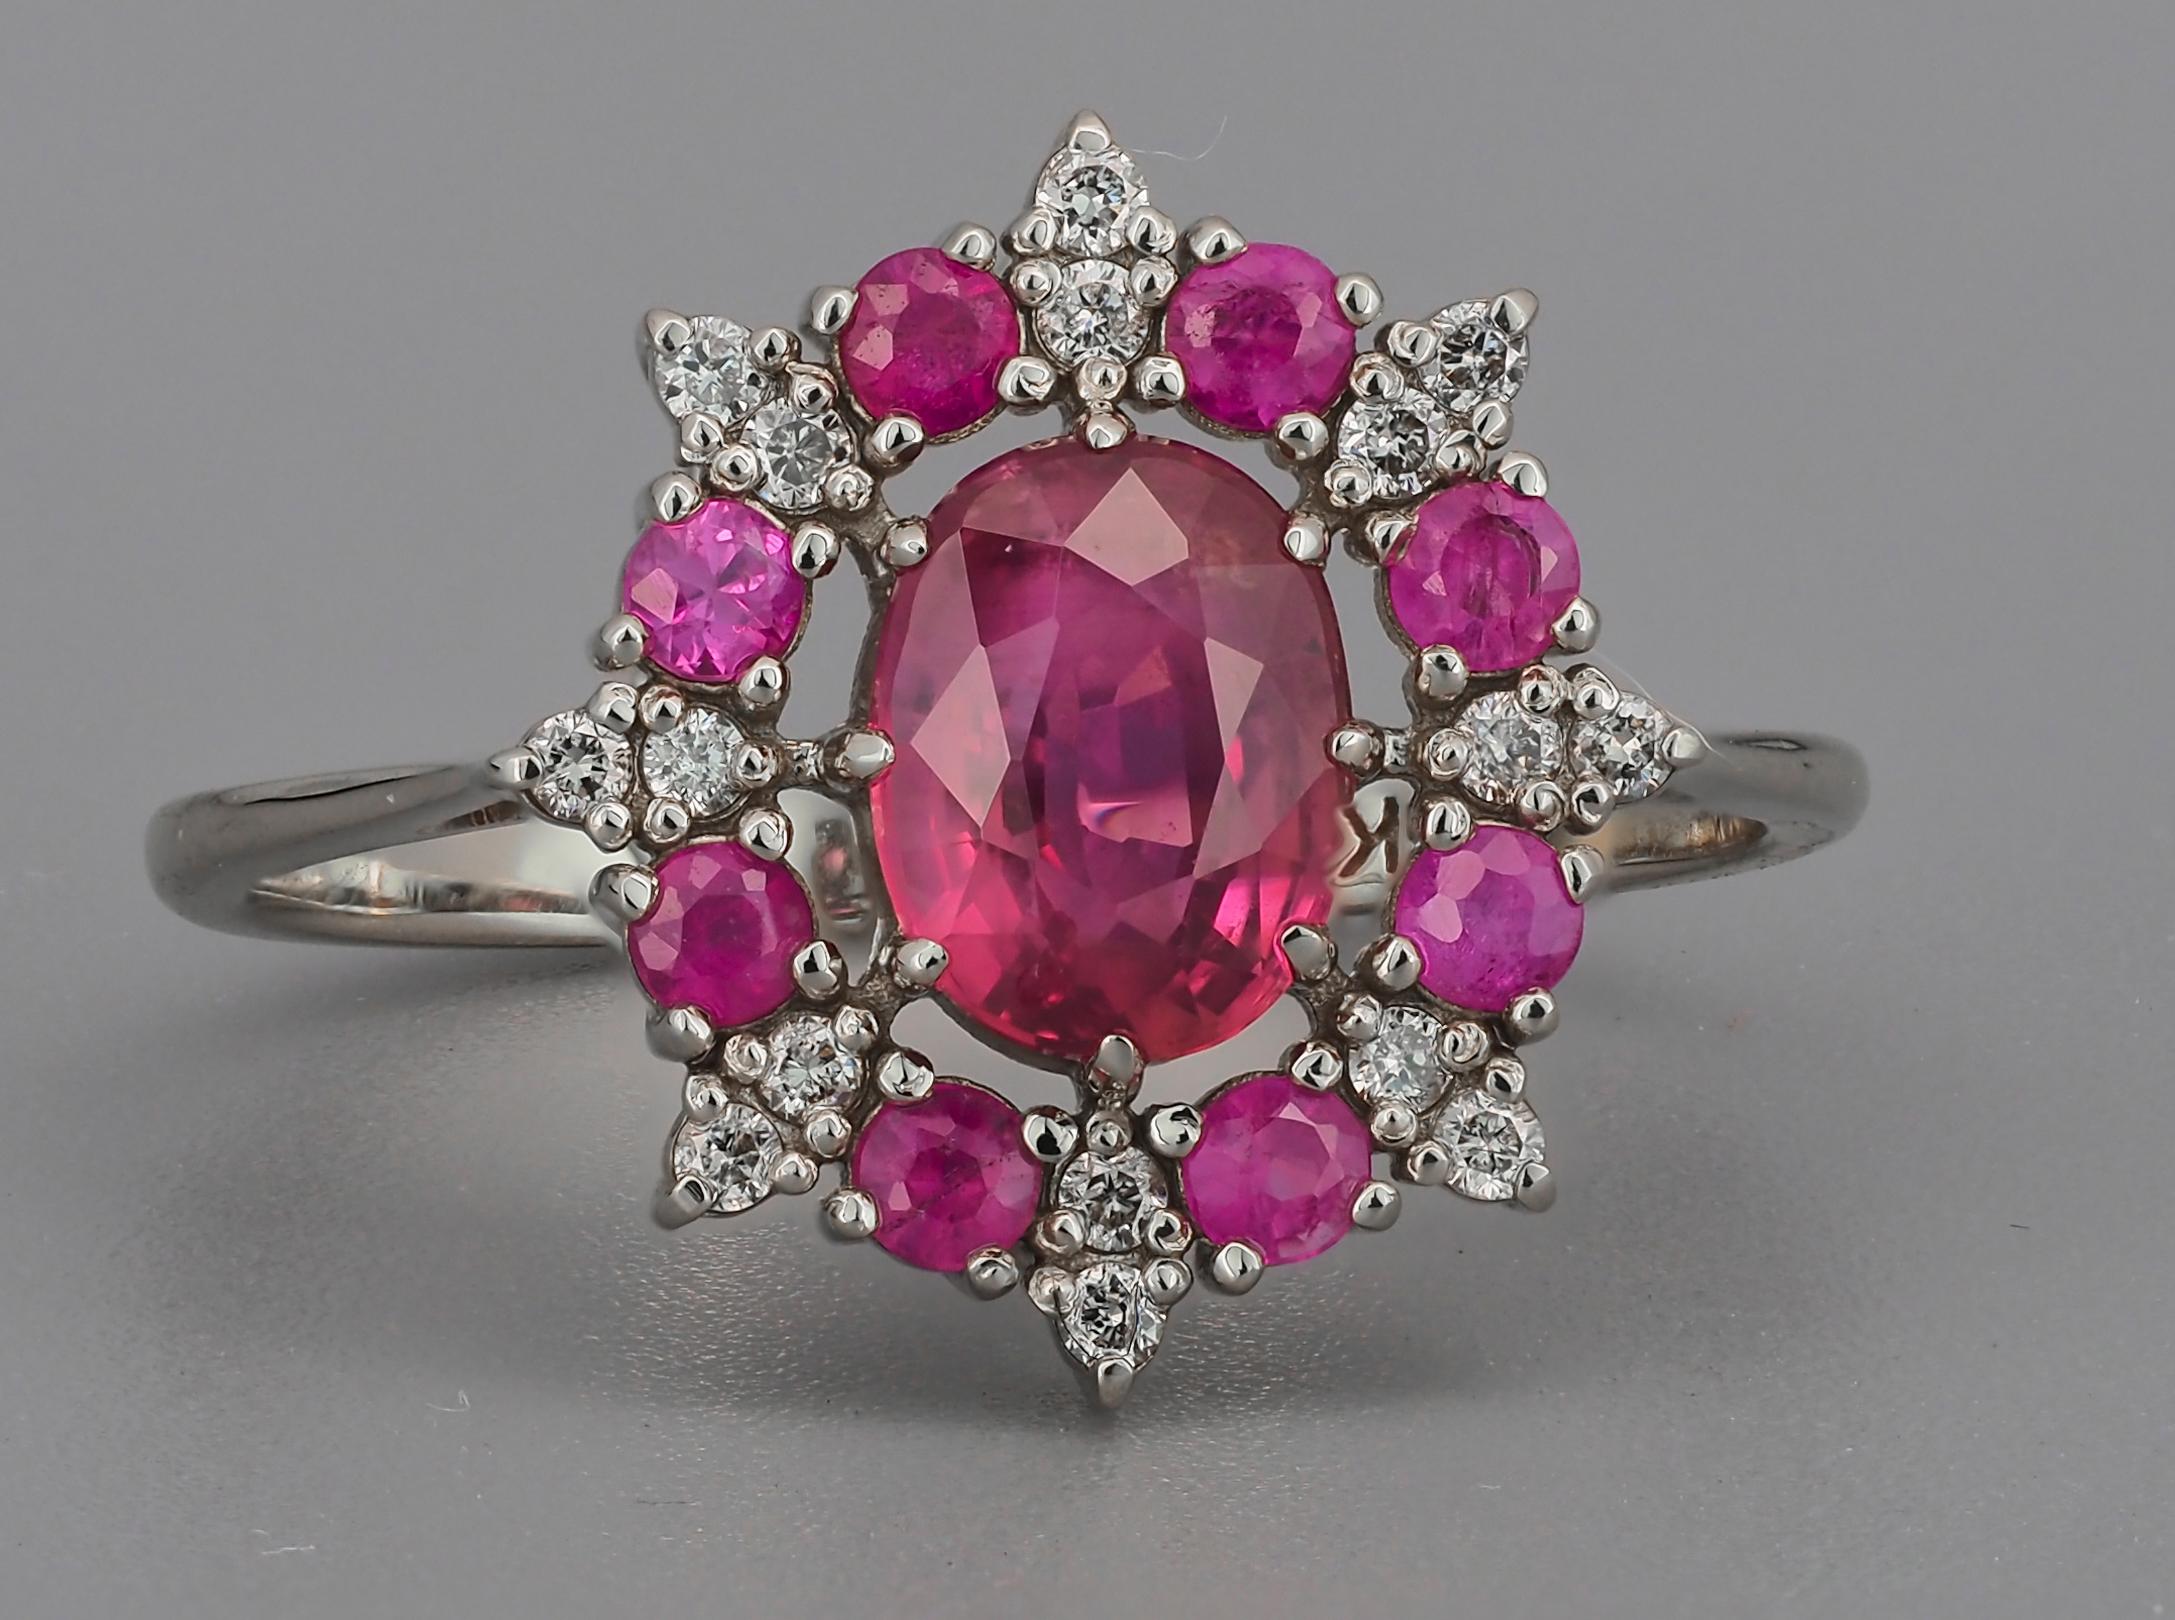 For Sale:  14 karat Gold Ring with Ruby and Diamonds. Snowflake Gold Ring 4